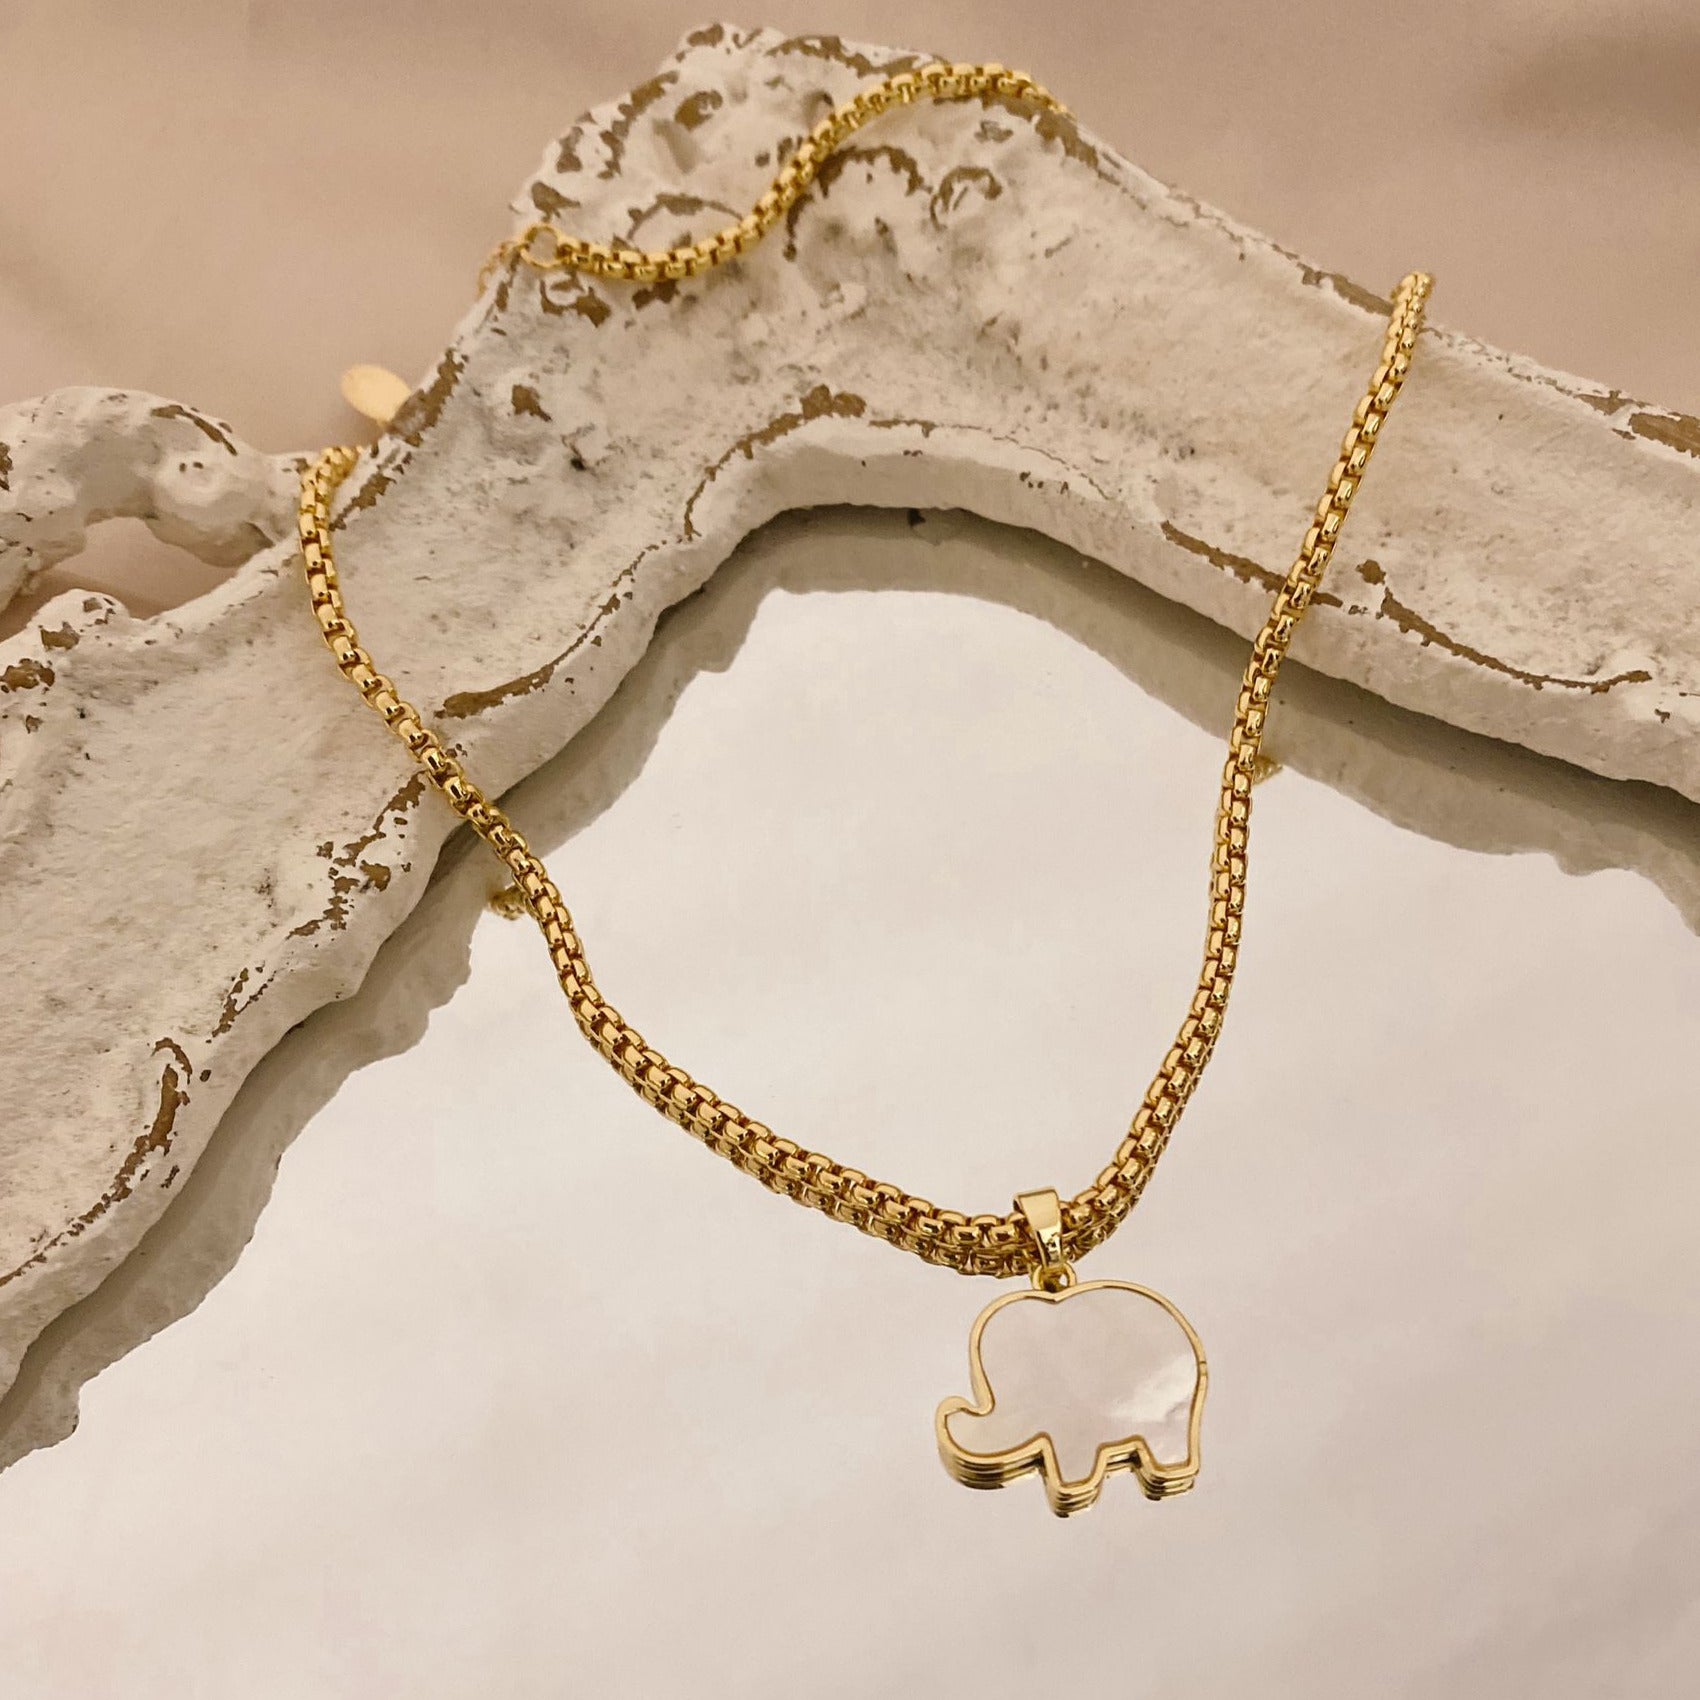 Gold Filled Chain with Elephant Charm